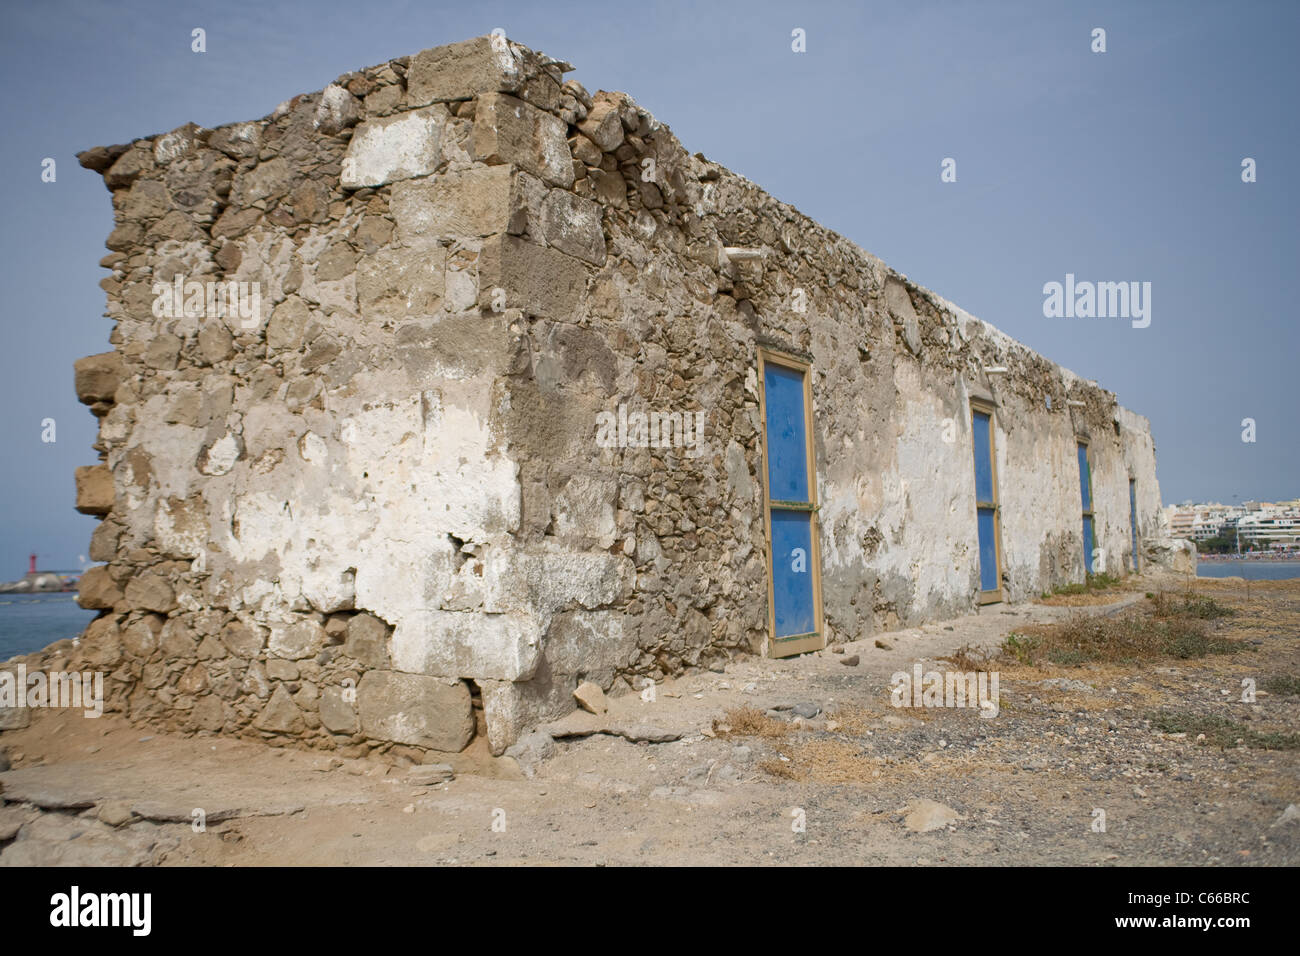 Old derelict building with blue doors and windows Stock Photo